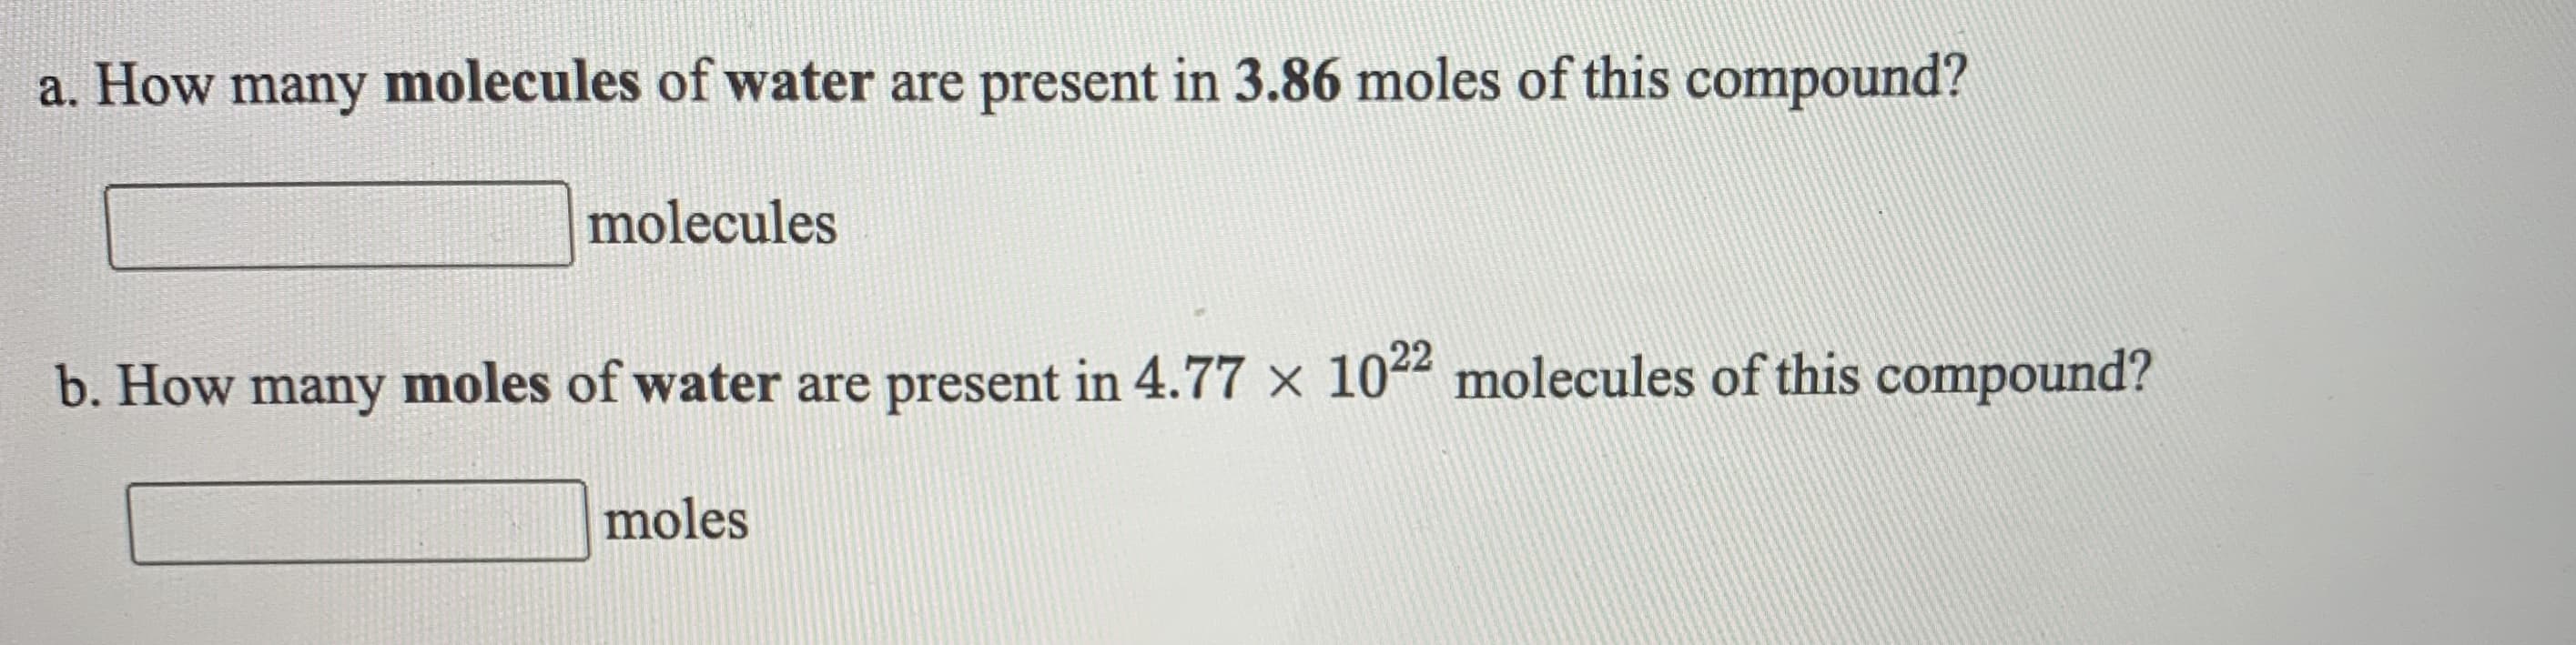 a. How many molecules of water are present in 3.86 moles of this compound?
molecules
22
b. How many moles of water are present in 4.77 x 10 molecules of this compound?
moles
